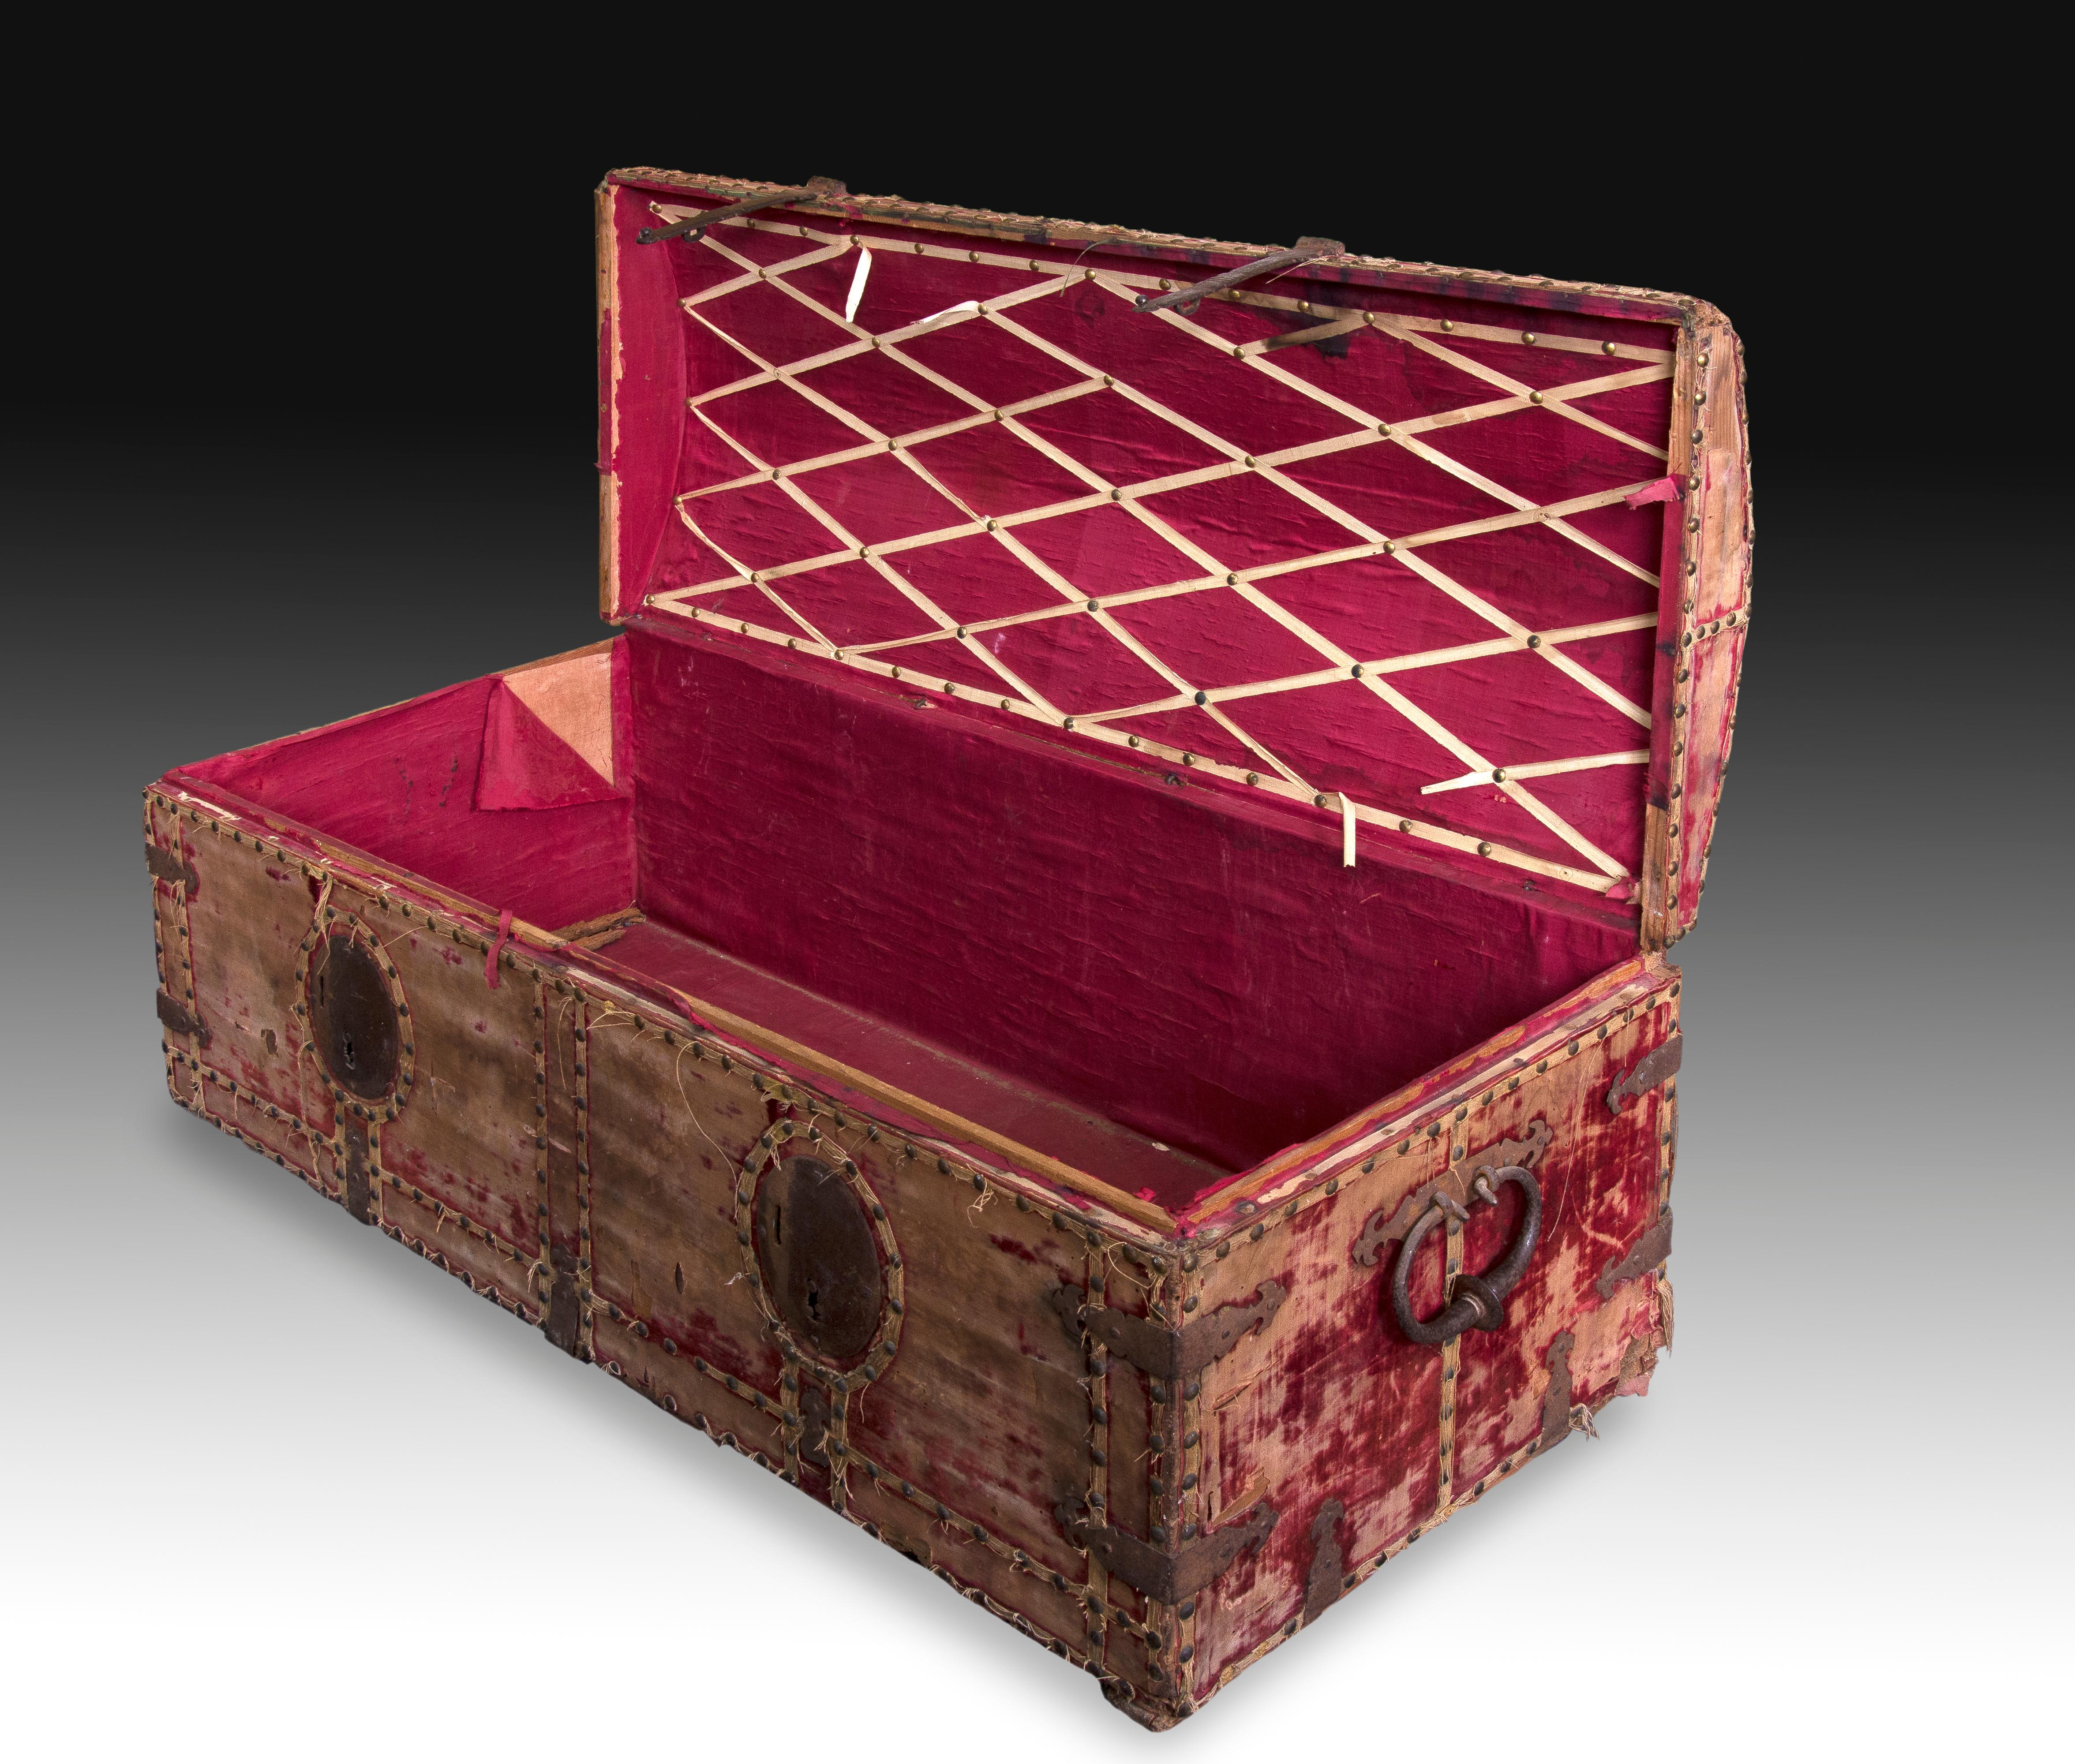 Rectangular chest with slightly curved lid that has two locks, handles and a series of ironwork and vintage studs in wrought iron, on the textile that covers it to the outside (also present inside the piece). These furniture for storing valuables